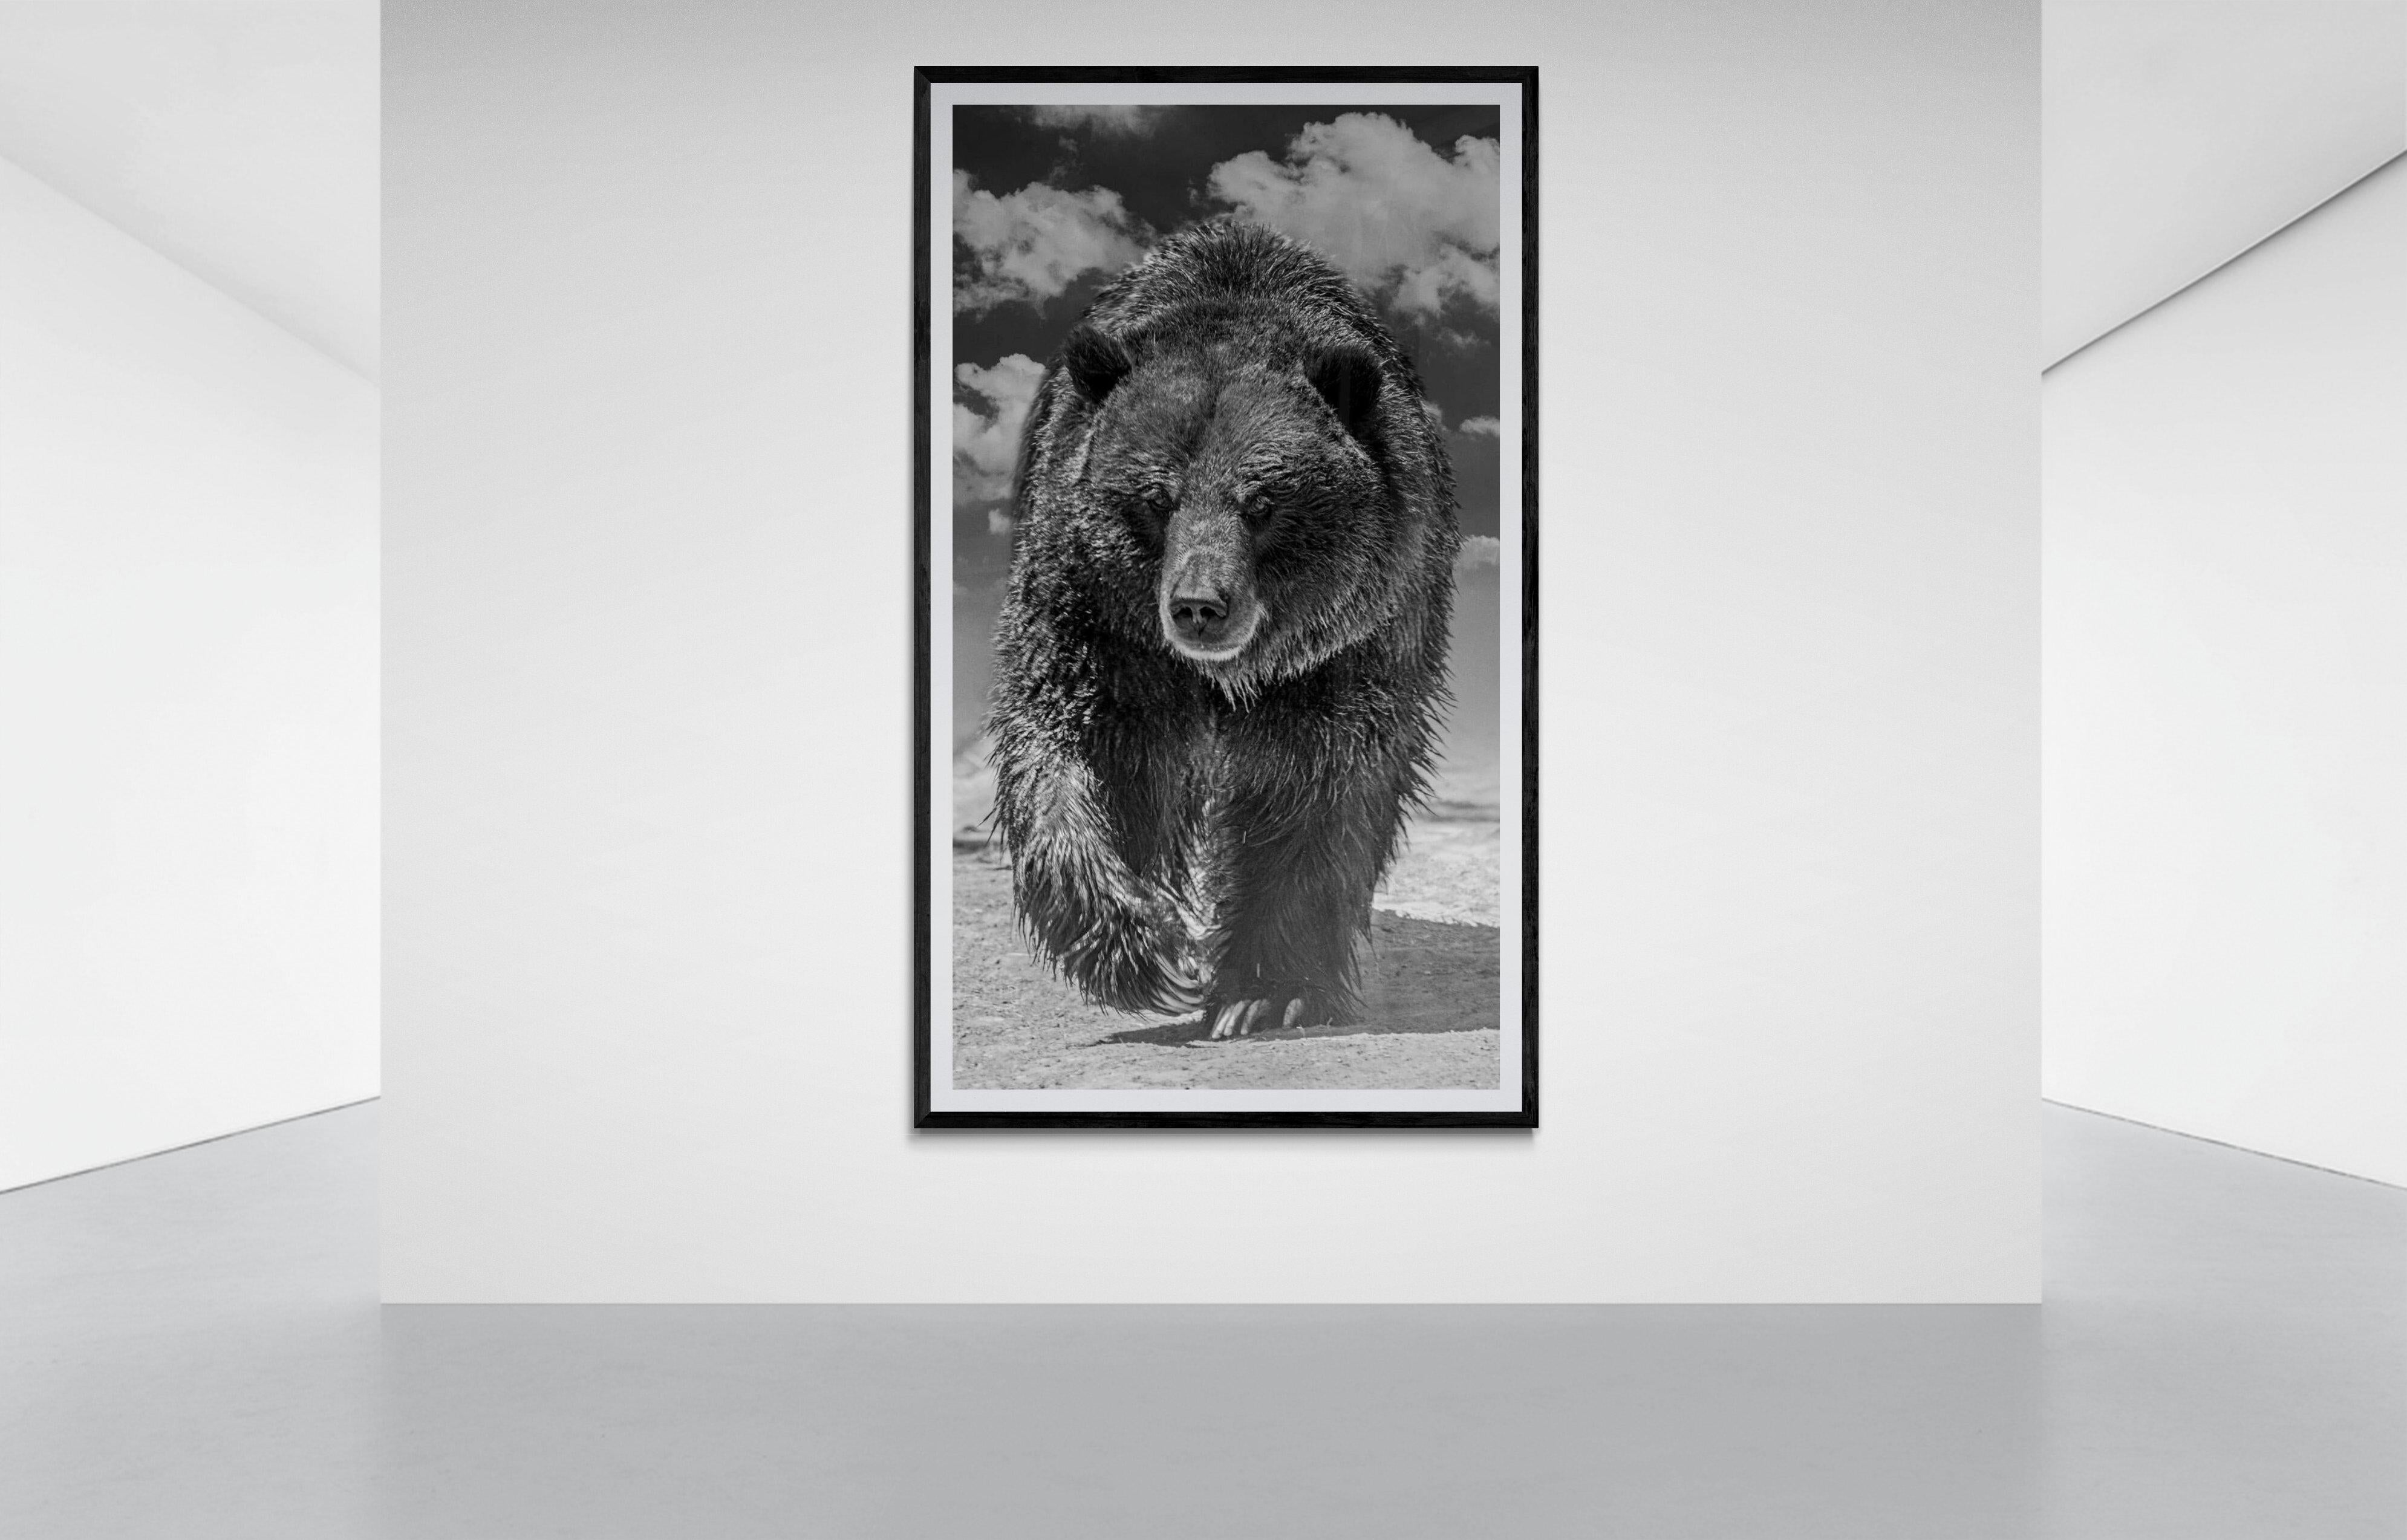 This is a black and white photograph of a Grizzly Bear
50x90  edition of 5. Signed by artist. 
Printed on archival paper using archival ink. 
Framing available. Inquire for rates. 


Shane Russeck has built a reputation for capturing America's